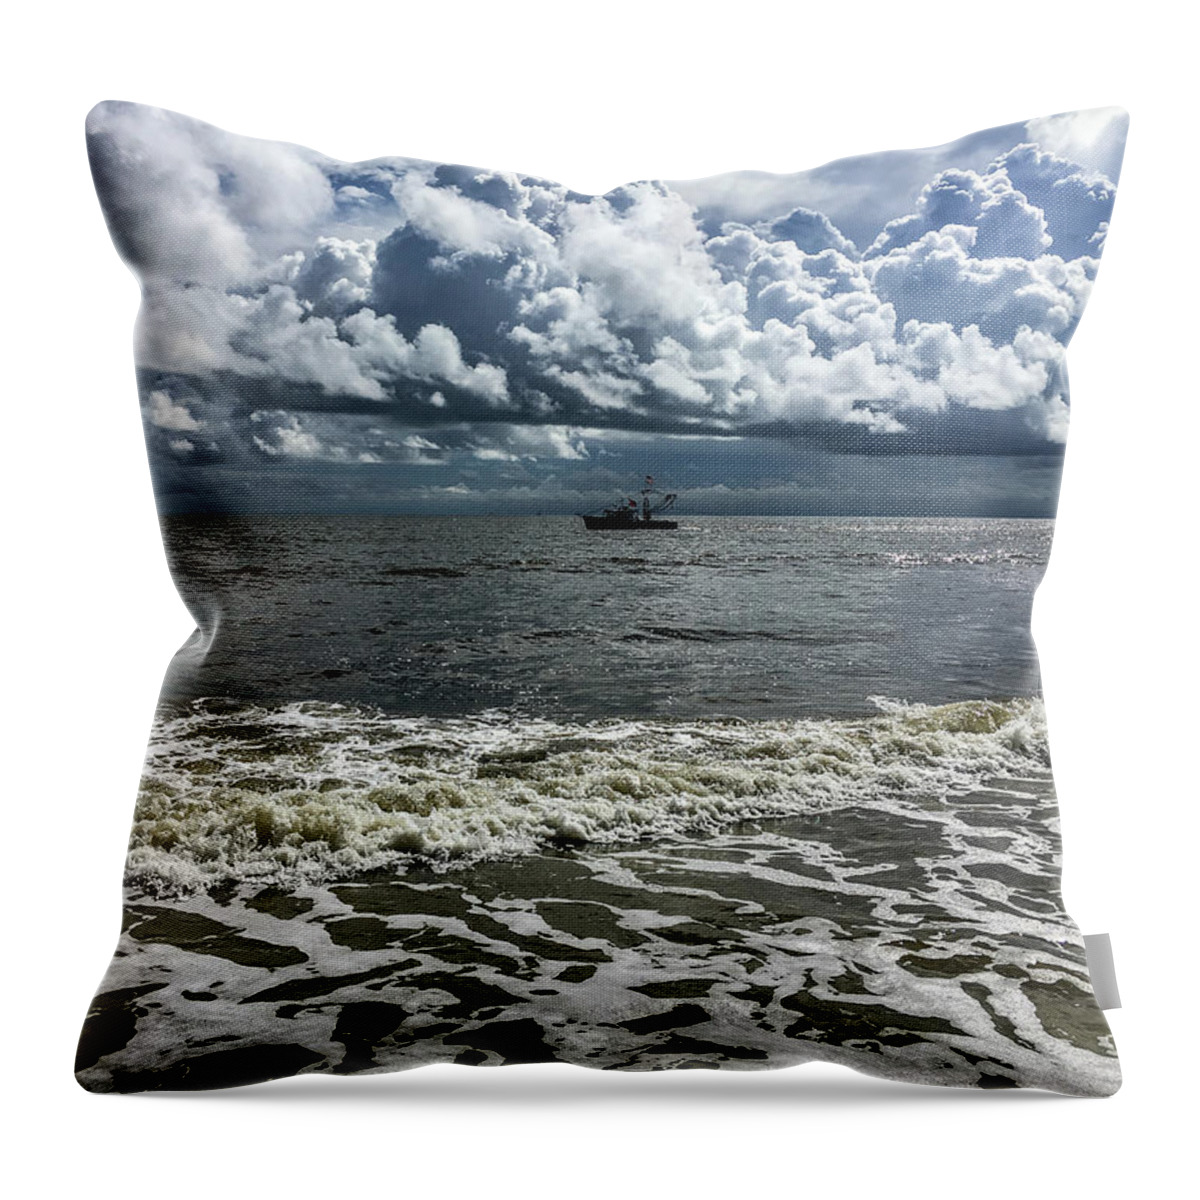 Ocean Throw Pillow featuring the photograph Stormy Boat by David Beechum